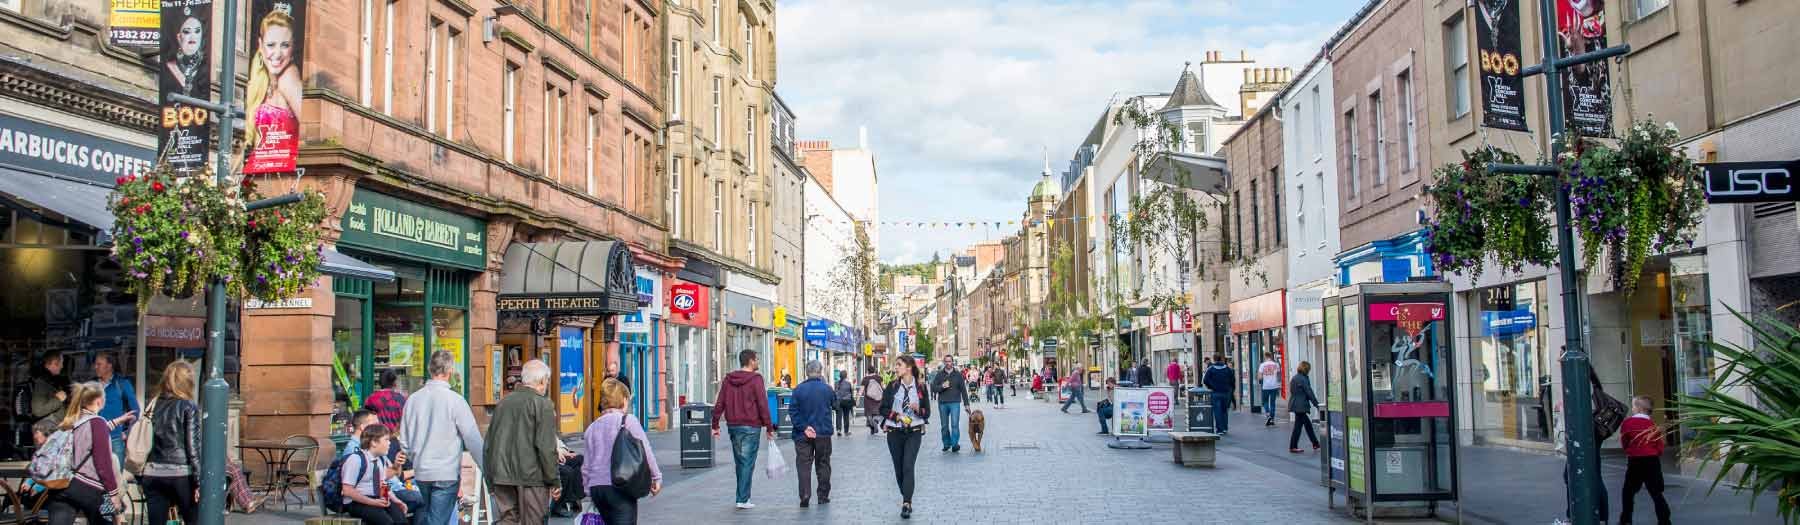 Image: Perth High Street. Credit: Image republished with kind permission of VisitScotland.